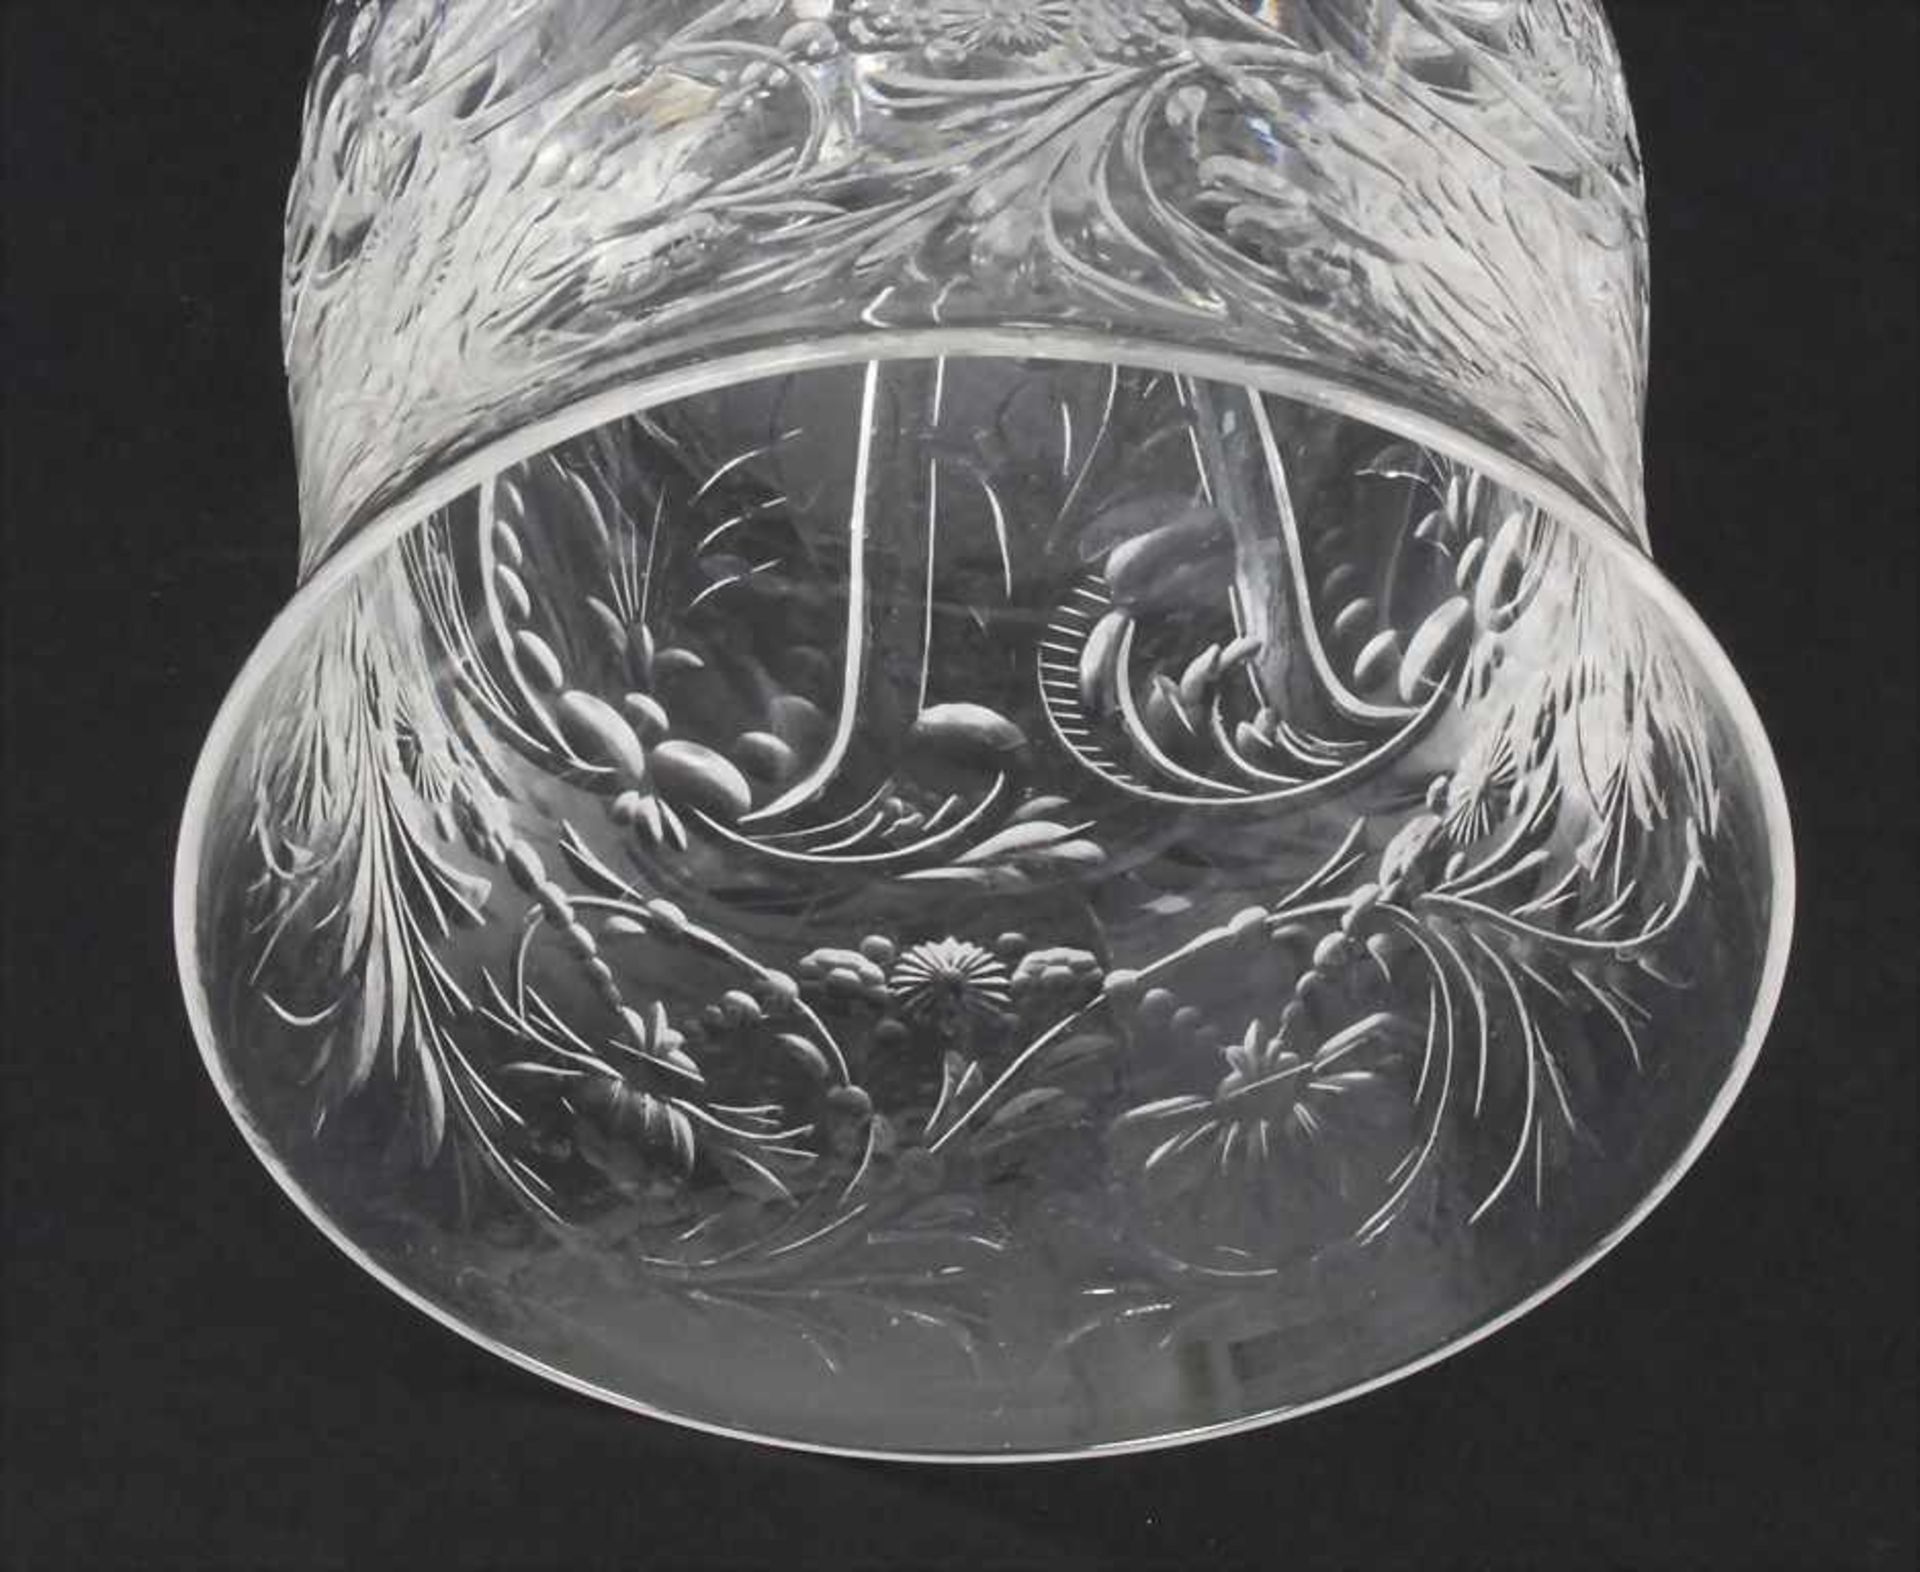 Weinglas / A wine glass, Frankreich, 19. Jh.Material: farbloses Glas, geschliffen,Höhe: 20,5 cm, - Image 4 of 6